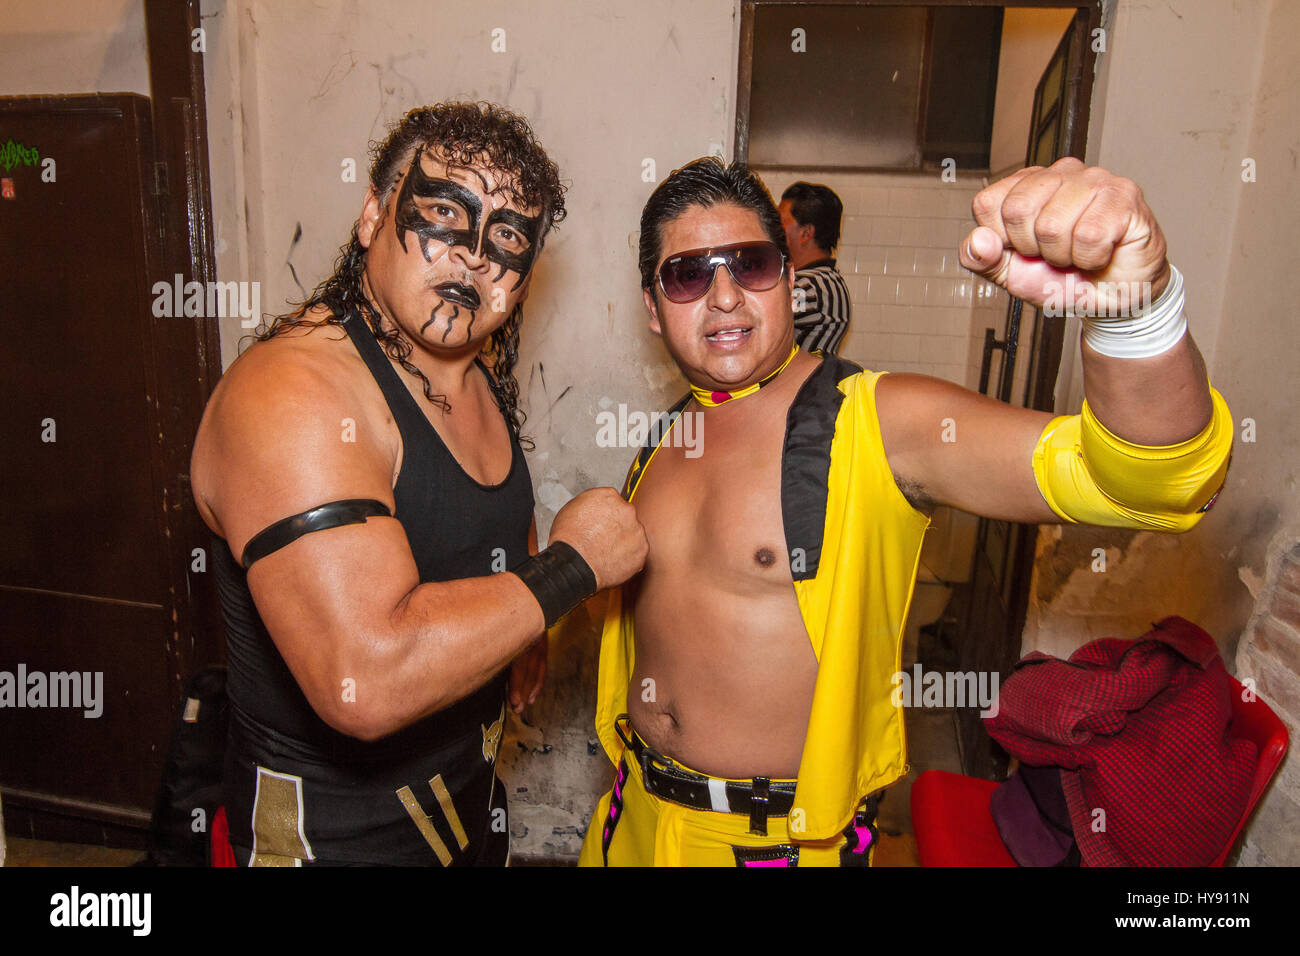 Free Wrestling in Mexico is huge, this 'sport' or 'spectacle' gets to all kink of people and eages. Wrestelers become anonymous heros behind their Stock Photo